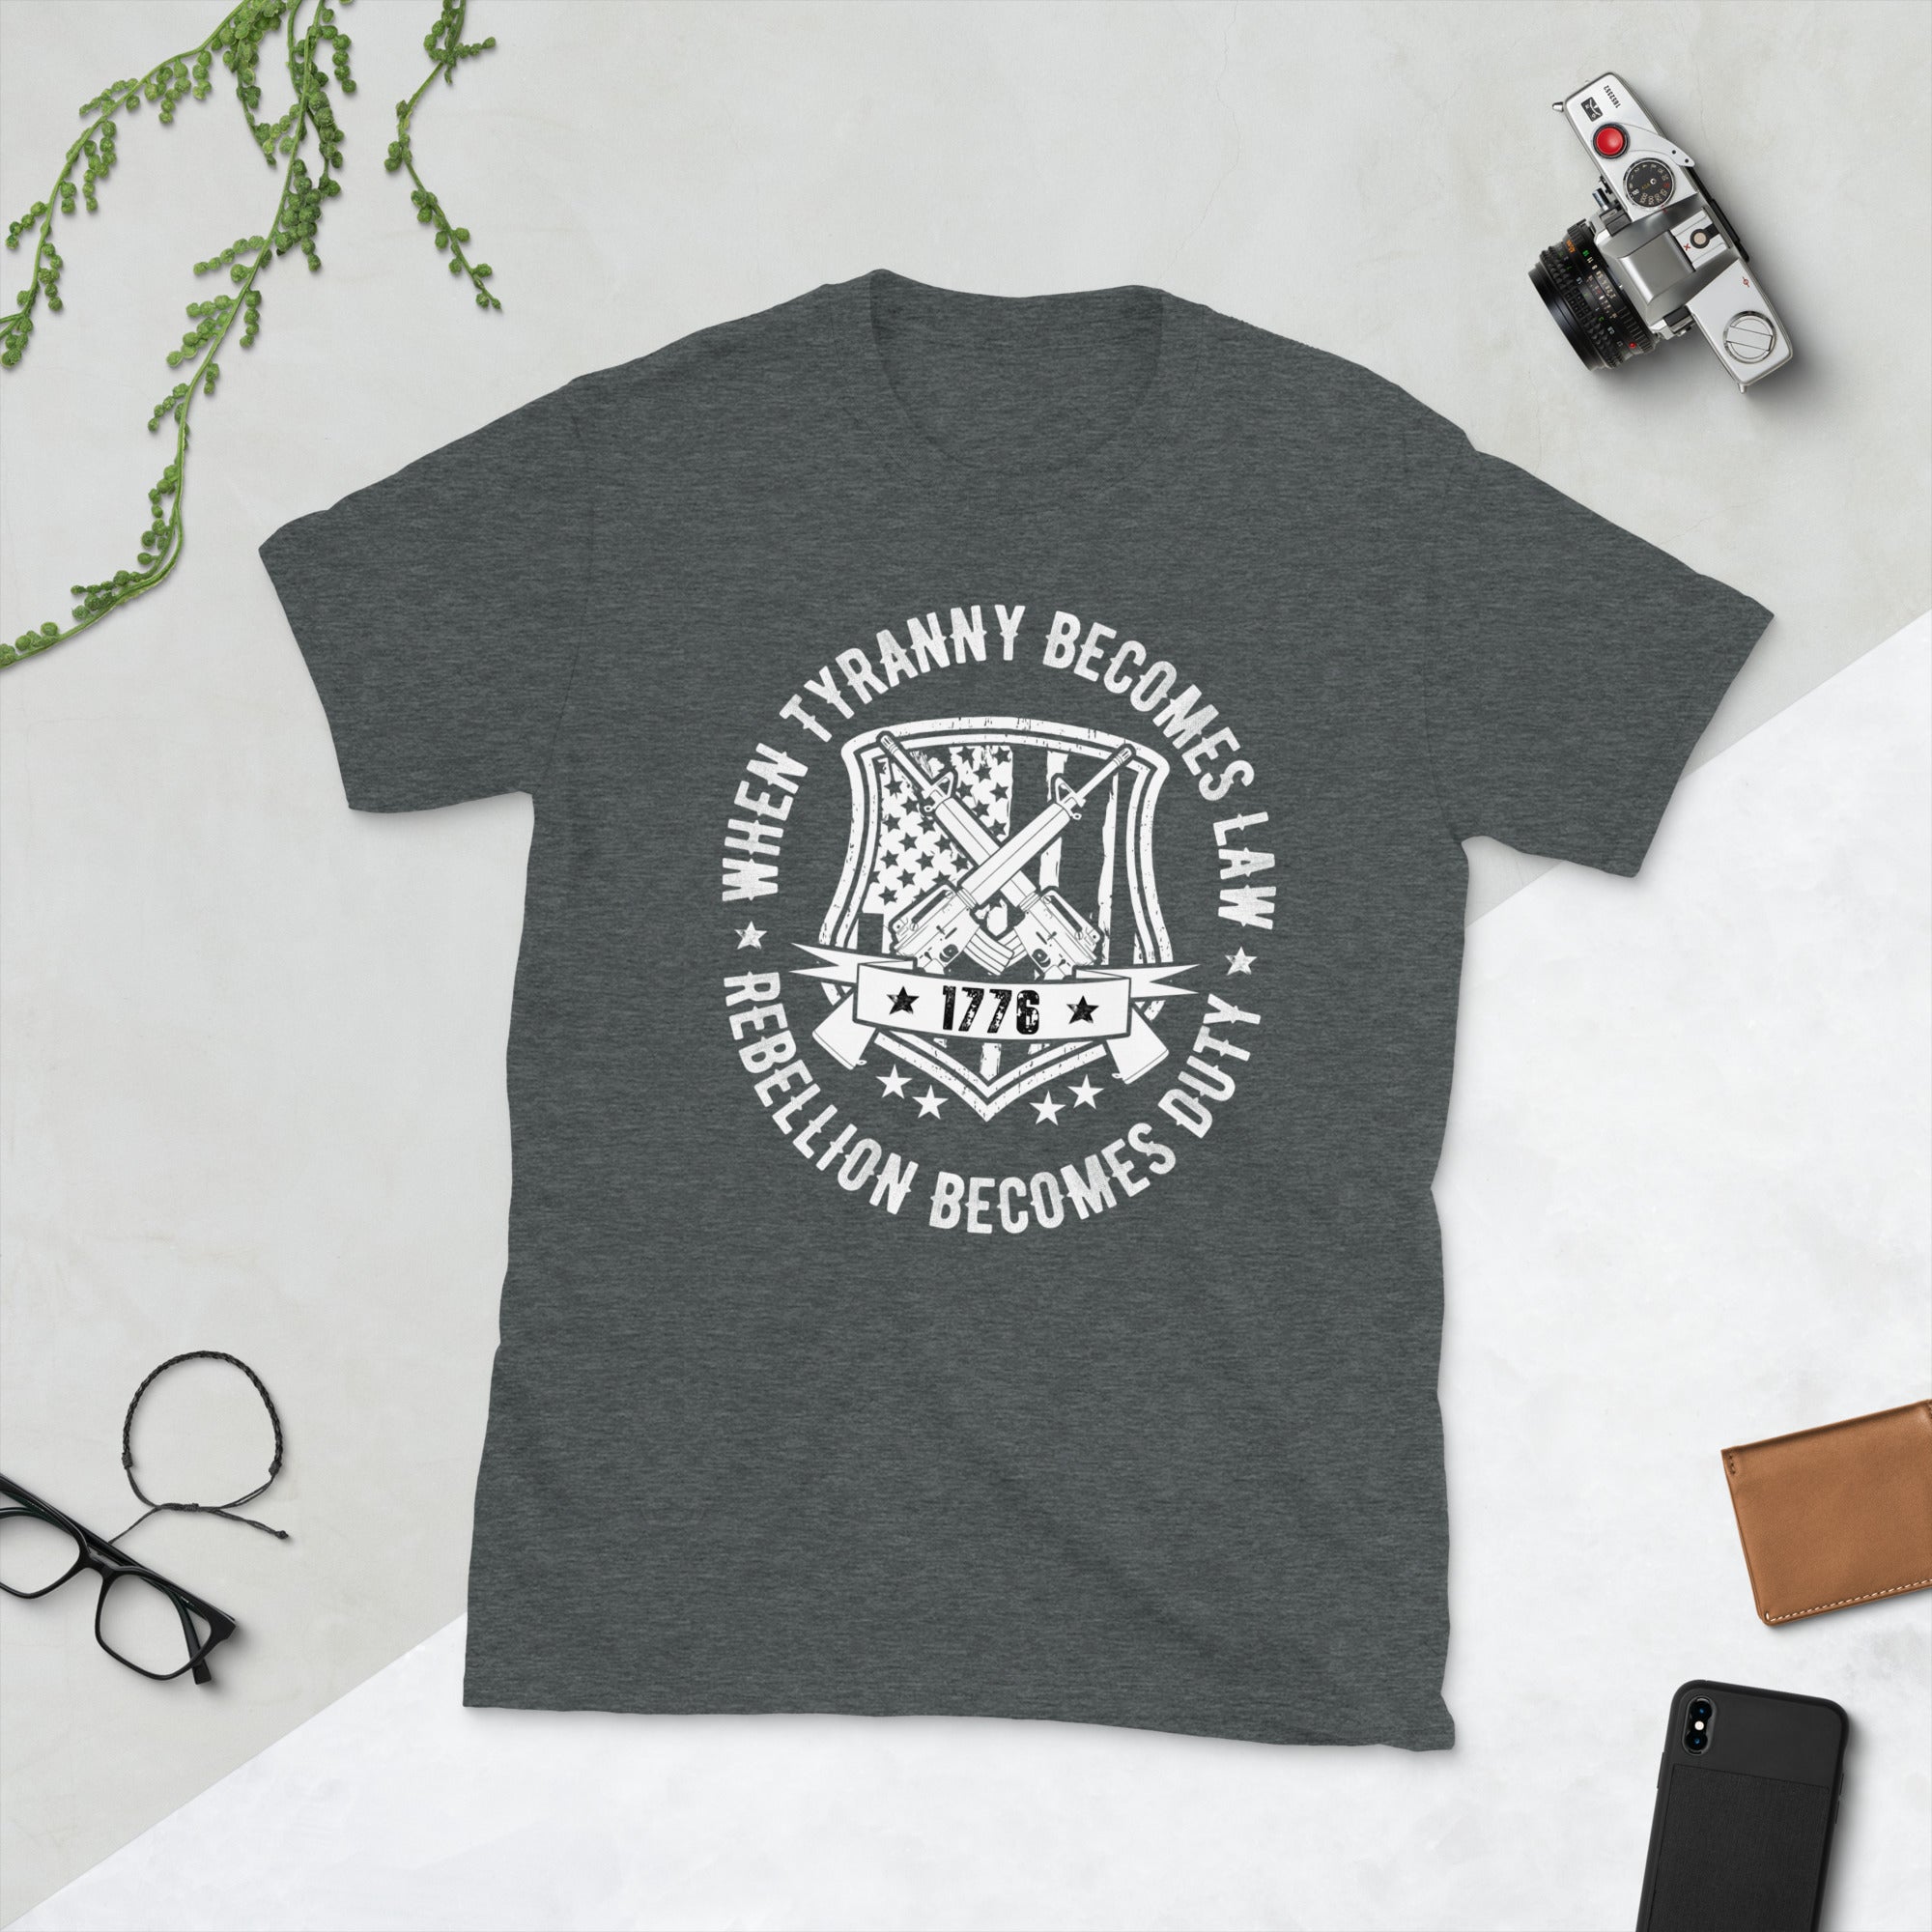 When Tyranny Becomes Law Shirt, Rebellion Becomes Duty, 1776 Shirt, Thomas Jefferson Quote, Freedom T Shirt, Patriotic Gifts, Tyranny Shirt - Madeinsea©